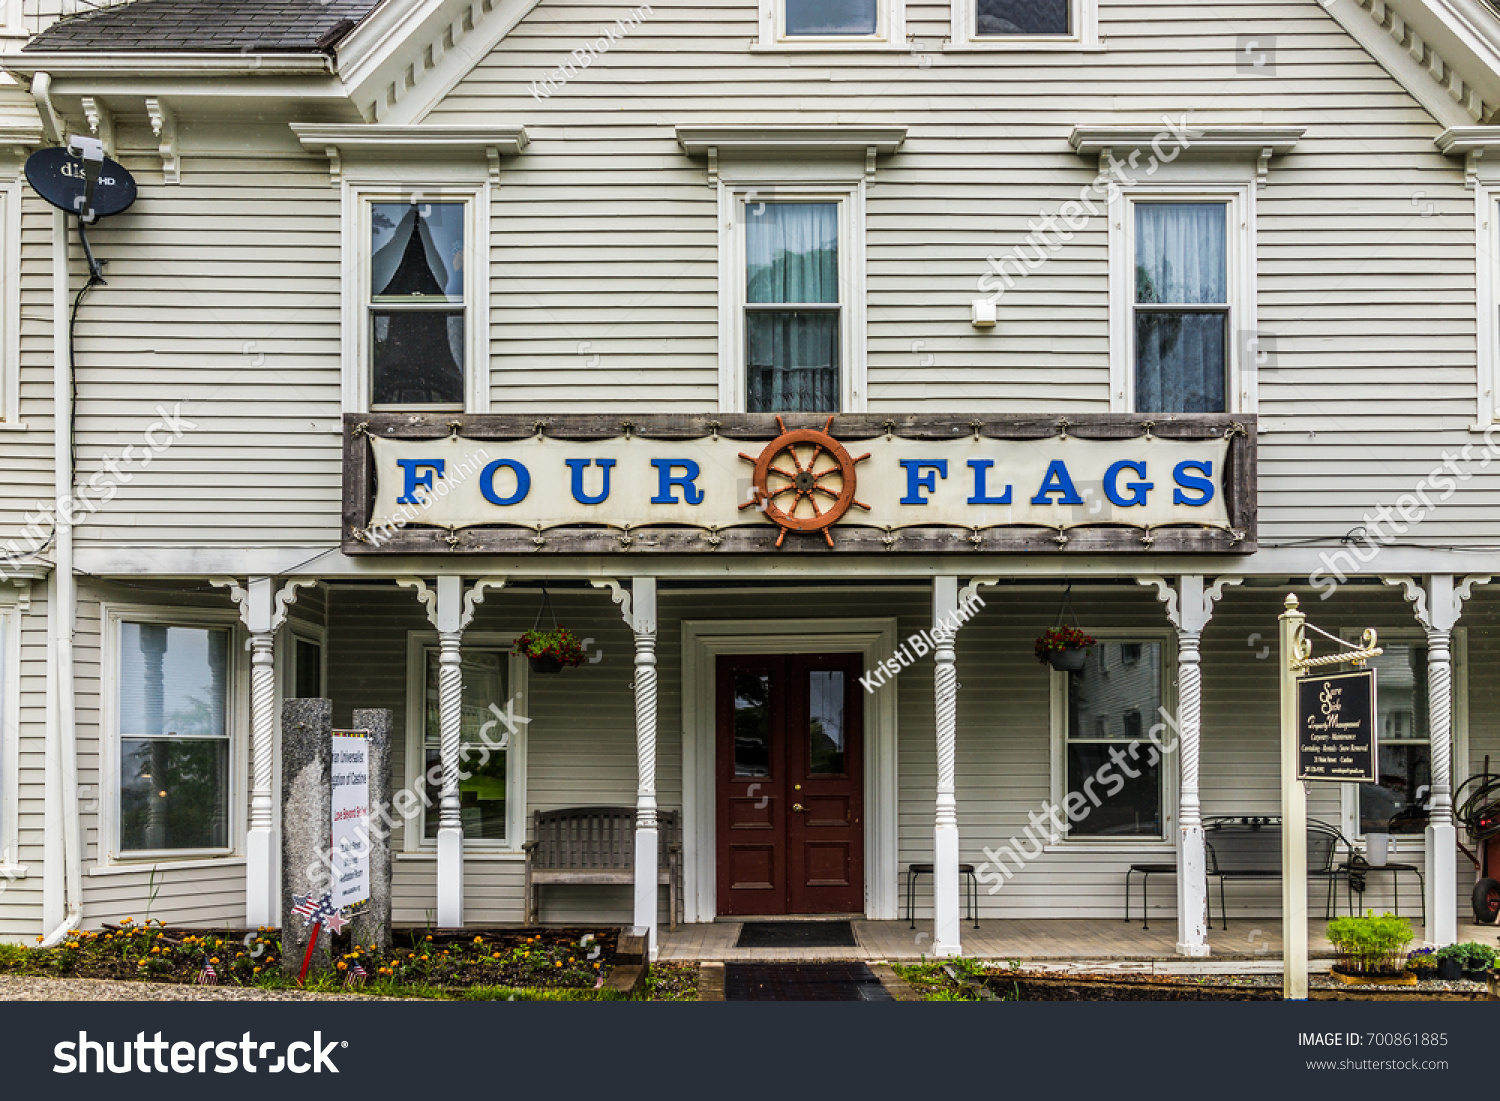 Castine, USA - June 9, 2017: Empty small village in Maine during rain with Four Flags gift shop sign with ship steering helm #700861885